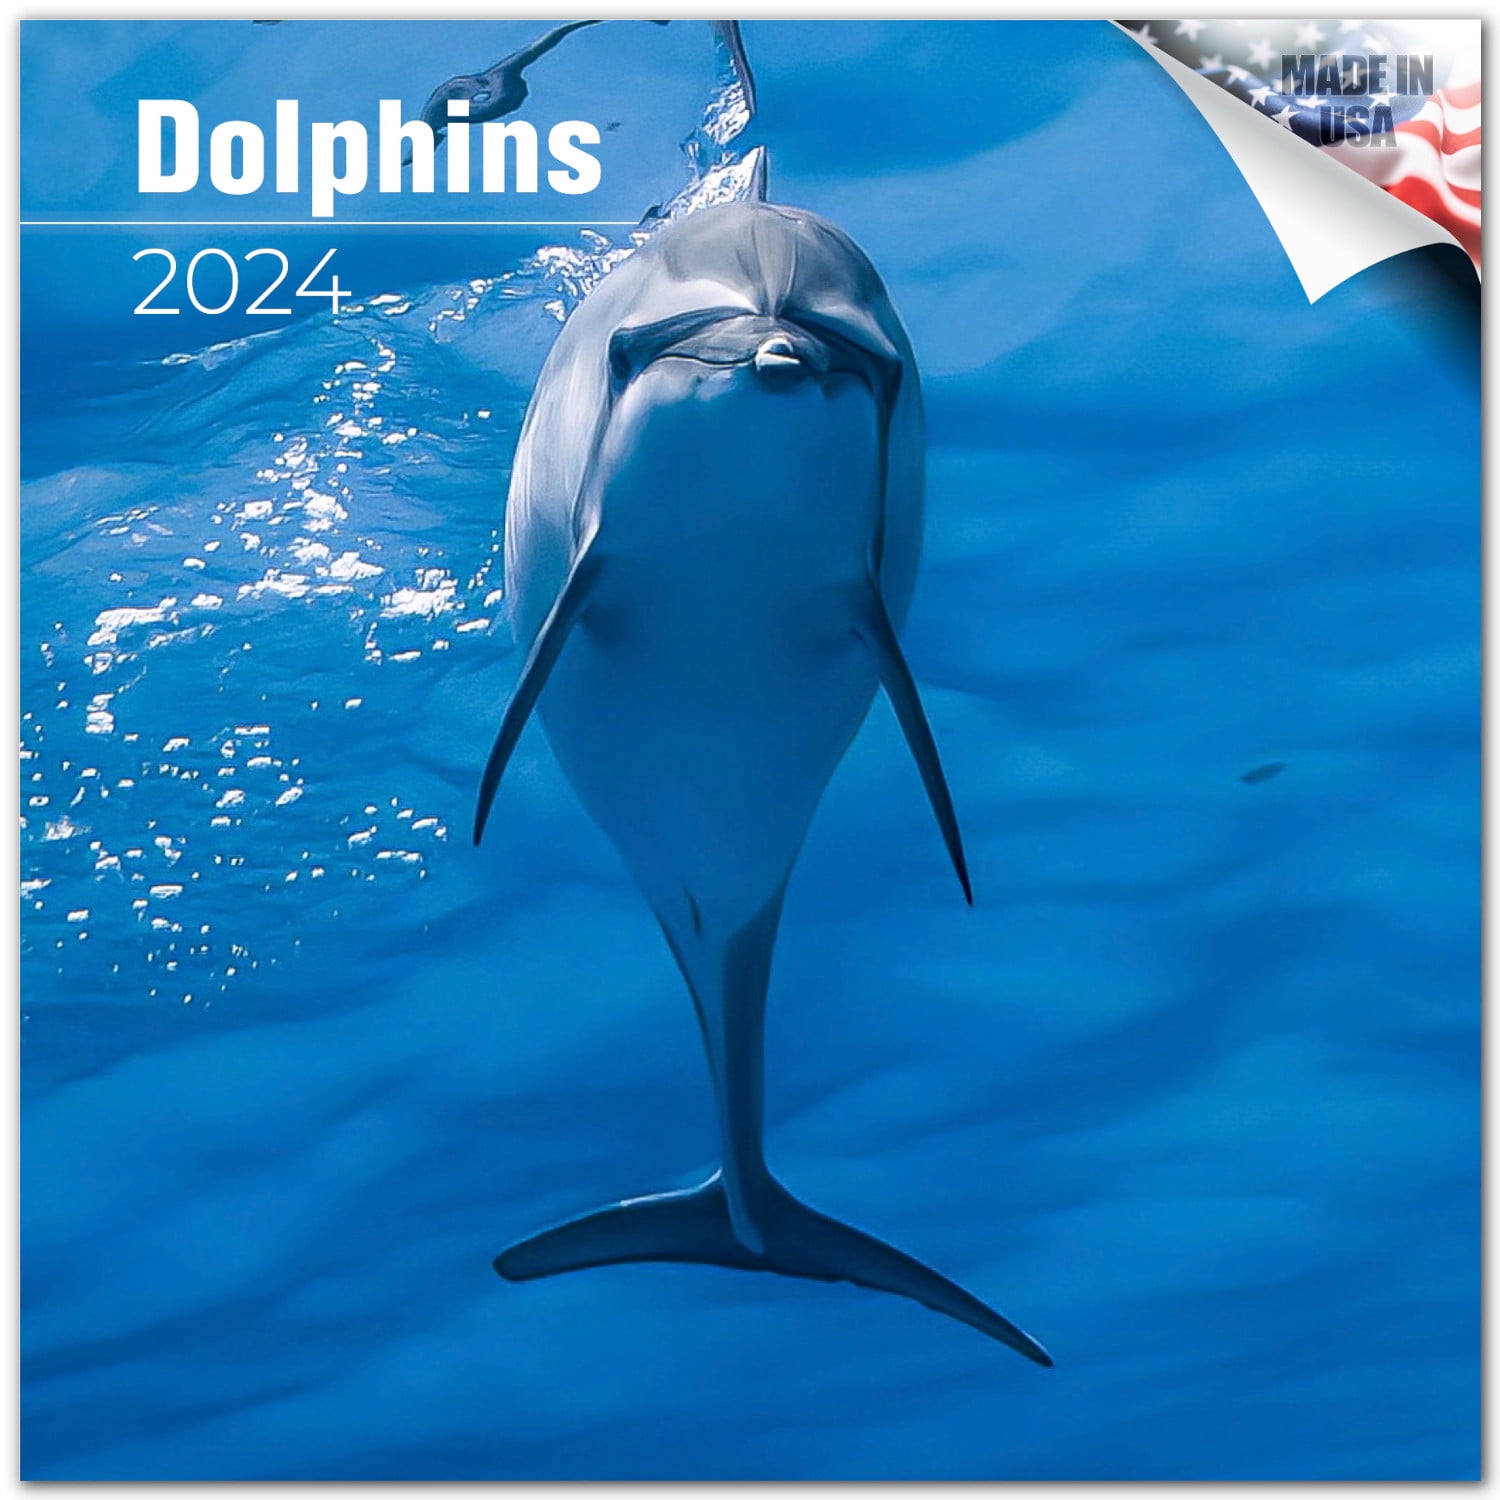 2023 2024 Dolphins Calendar - Cute Animal Sealife Monthly Wall